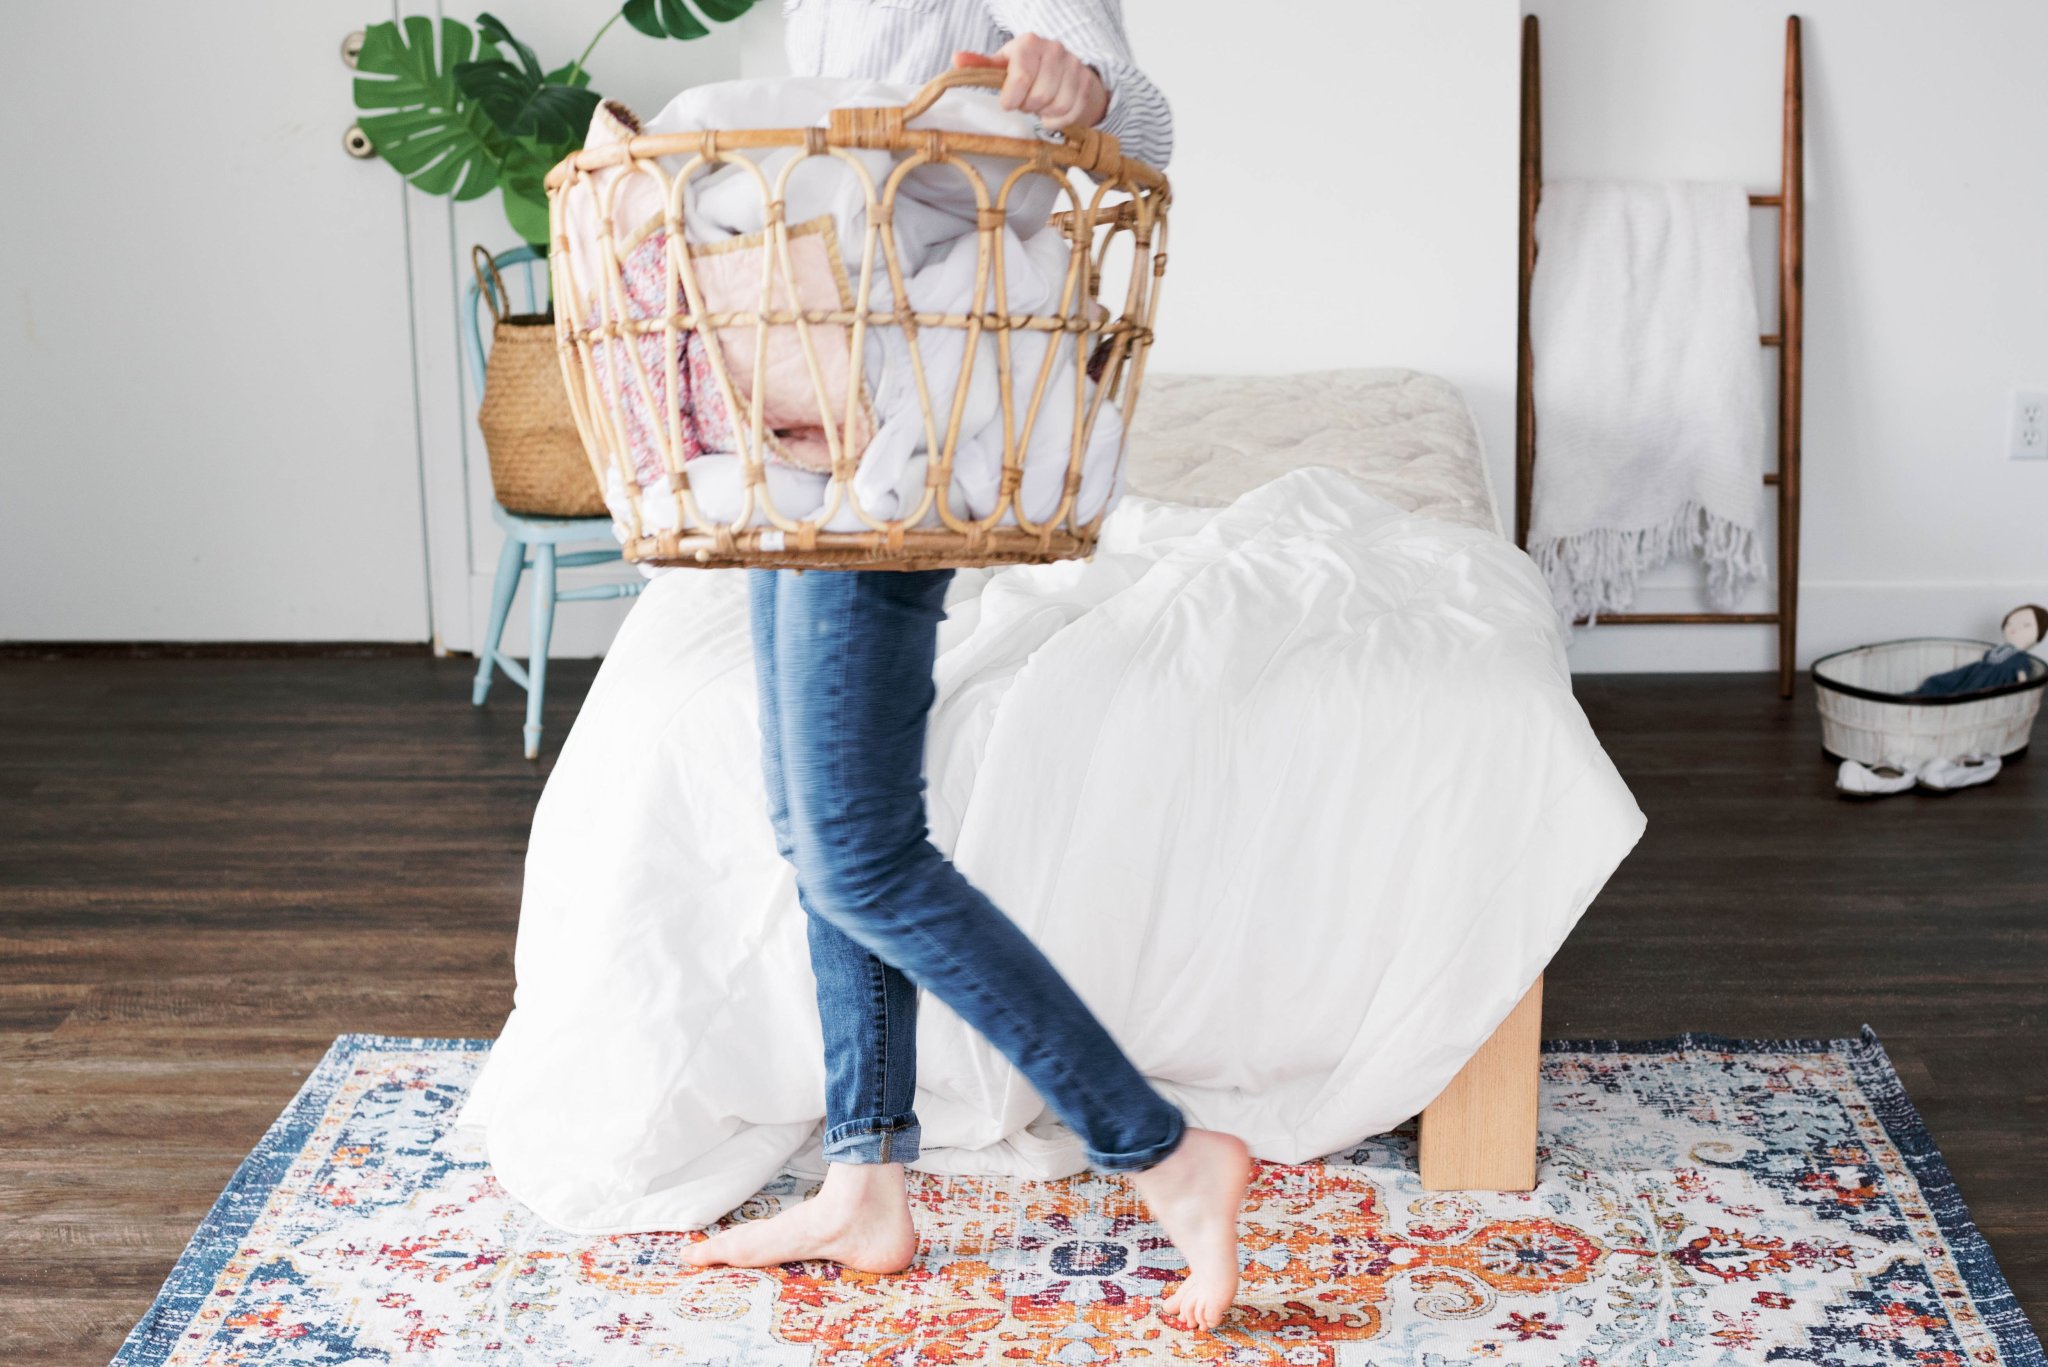 15-Minute Decluttering Projects That Will Transform Your Home